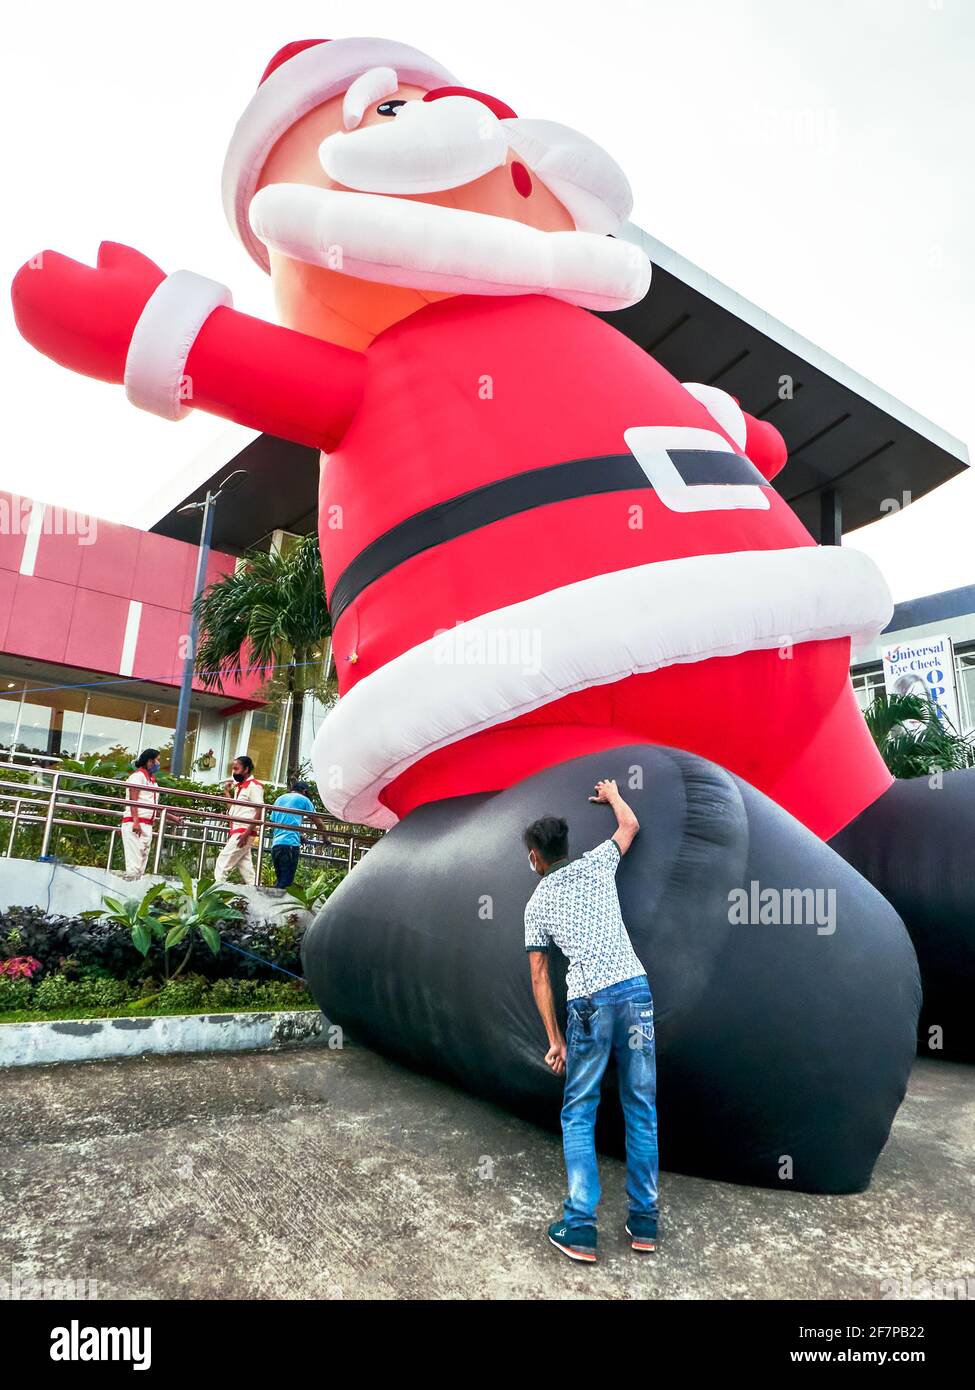 Man is holding the feet of a gigantic inflatable Santa Claus sales promotion figure in front of City Mall, Boracay Island, Philippines, Asia Stock Photo